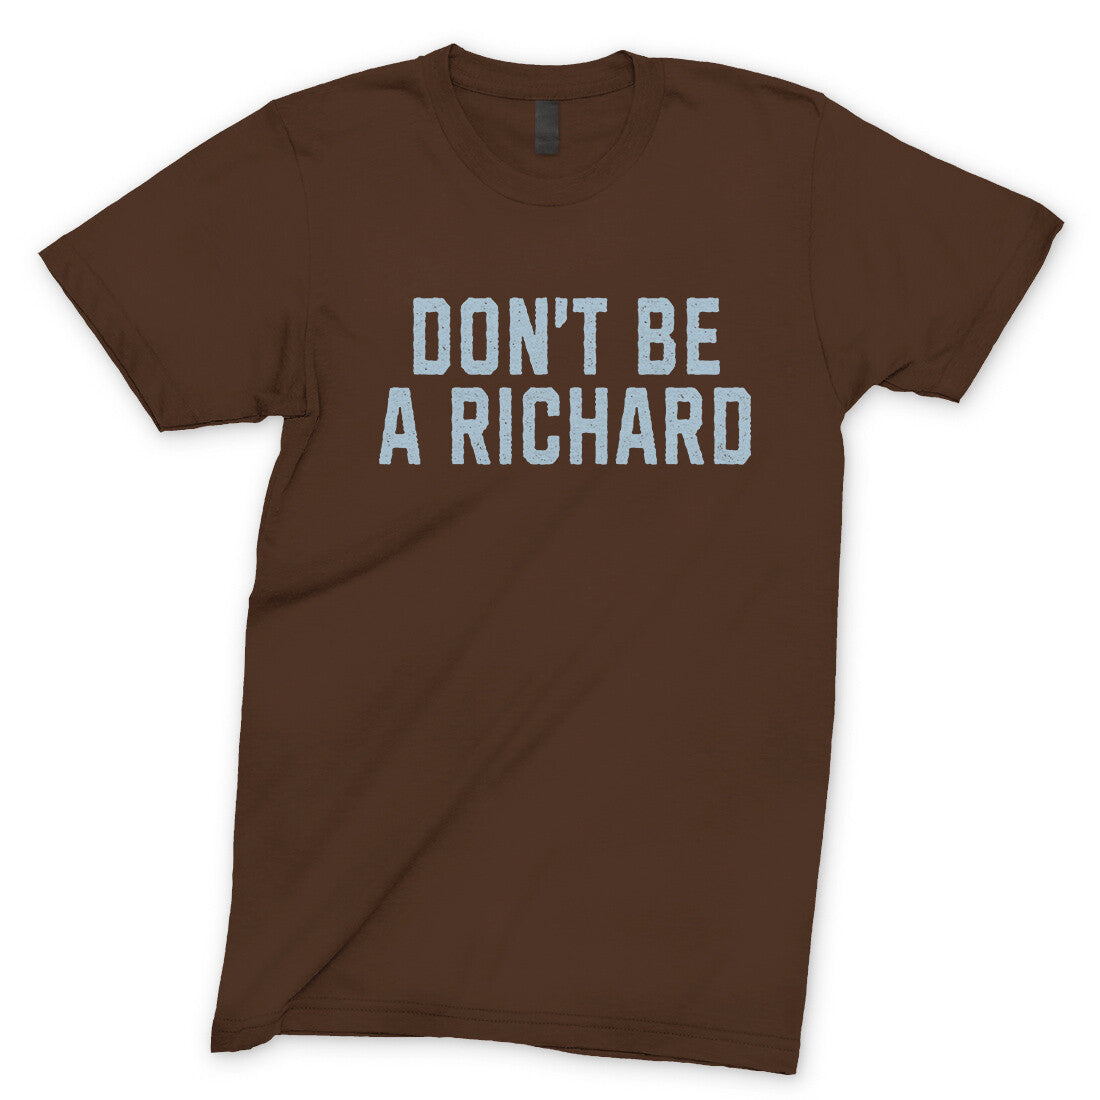 Don't Be a Richard in Dark Chocolate Color